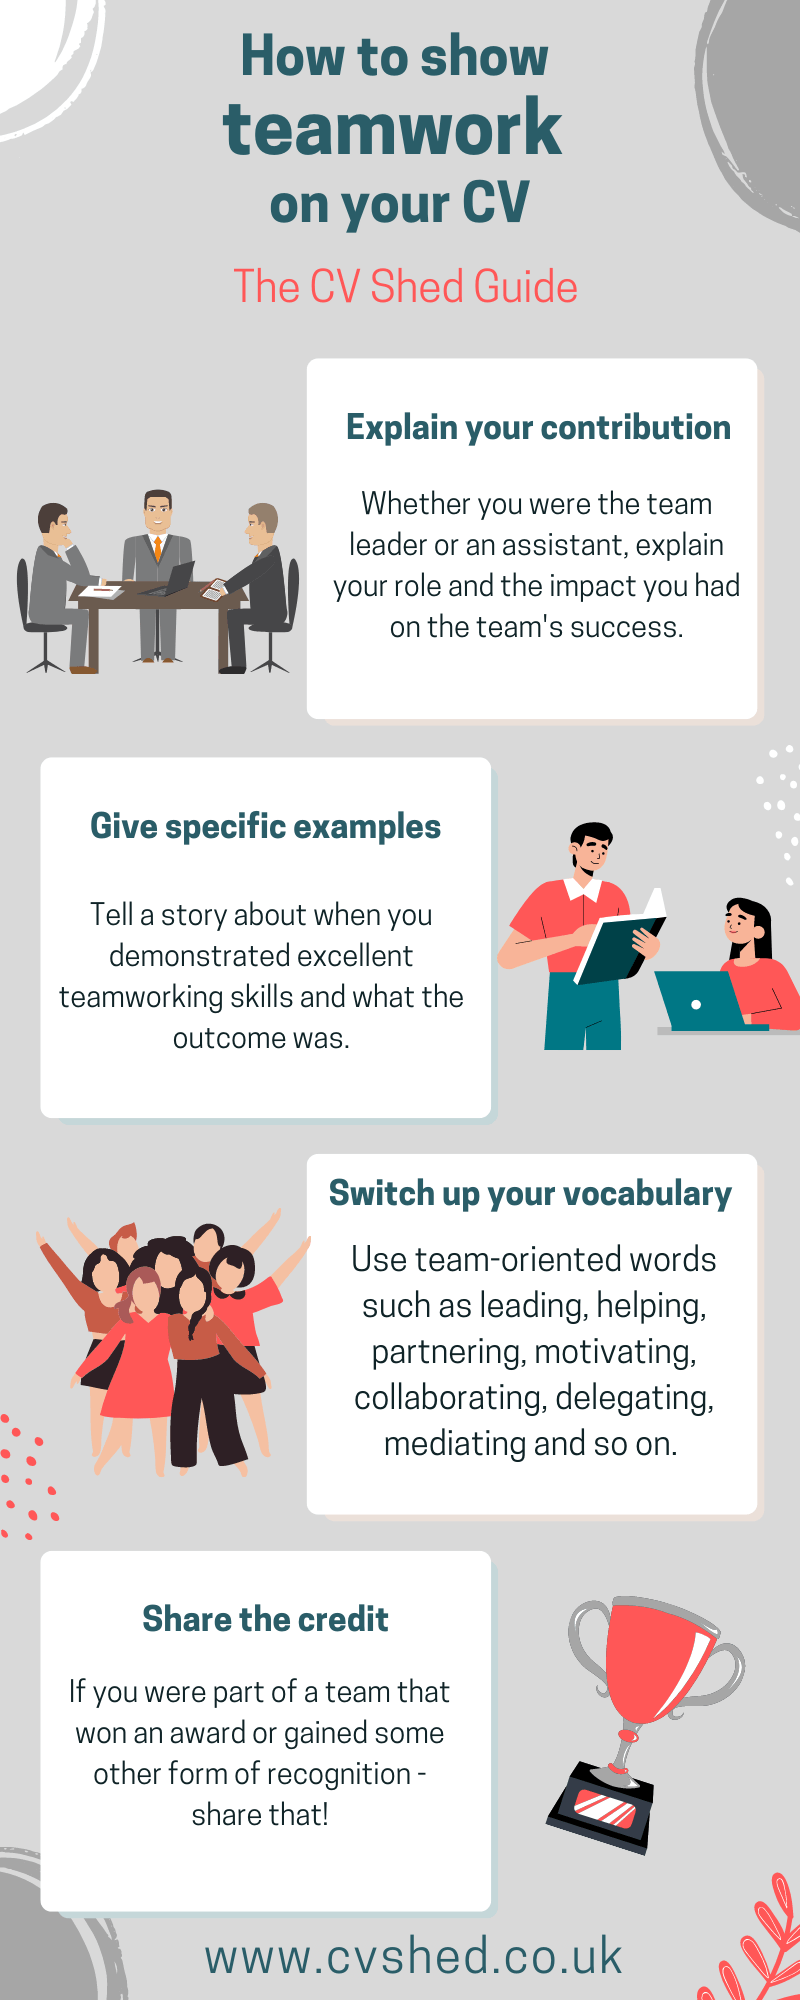 Infographic showing how to show teamwork on a CV